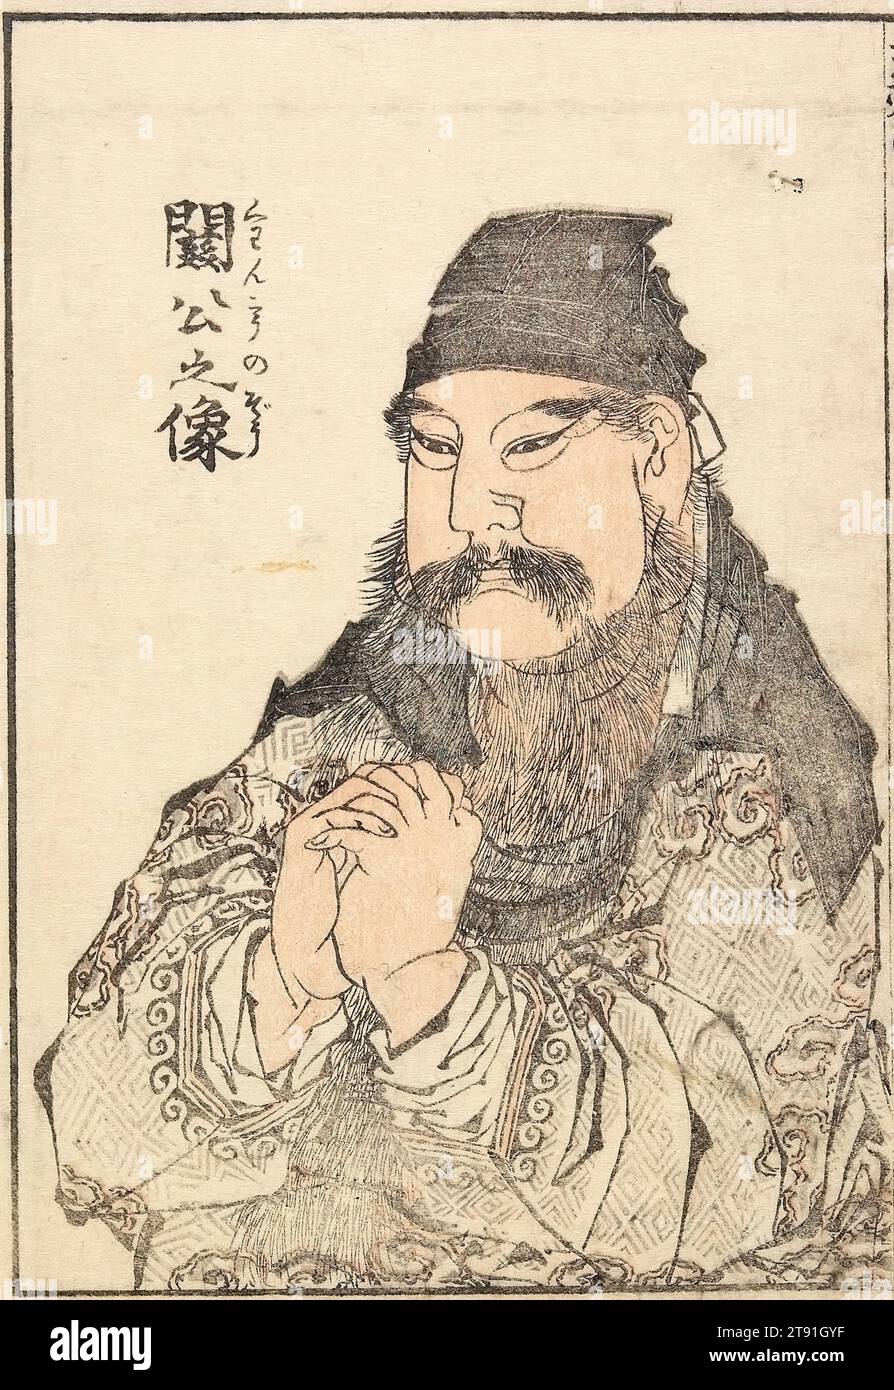 Portrait of Kan'u, 1816, Katsushika Hokusai, Japanese, 1760 - 1849, 8 1/16 x 5 3/16 in. (20.5 x 13.2 cm) (sheet), From a woodblock printed book; ink and color on paper, Japan, 19th century Stock Photo